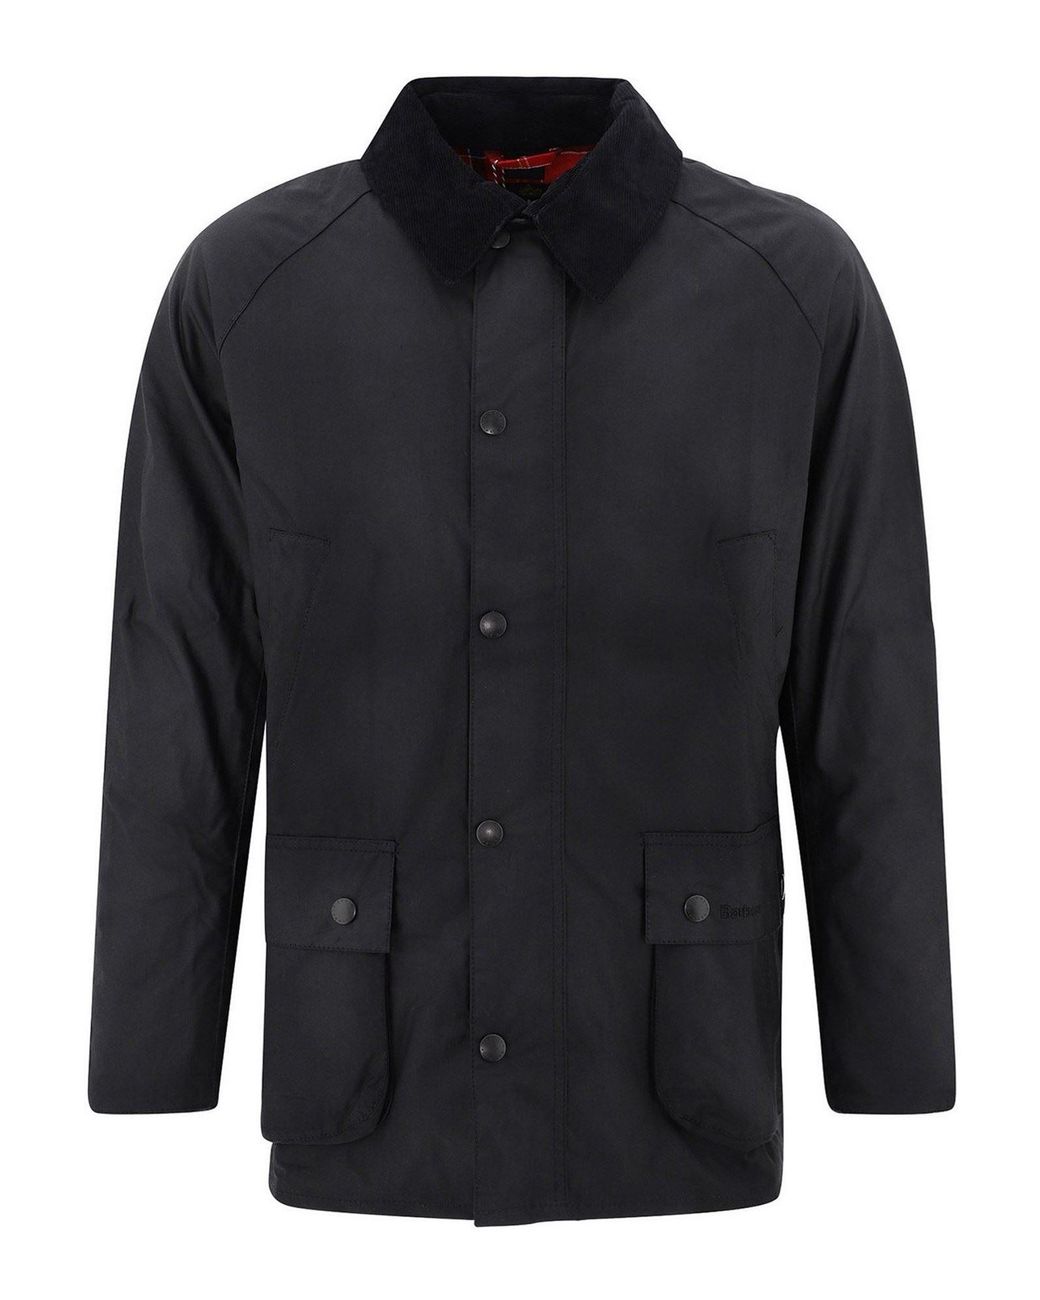 Barbour Cotton Trench Coat in Black for Men - Lyst